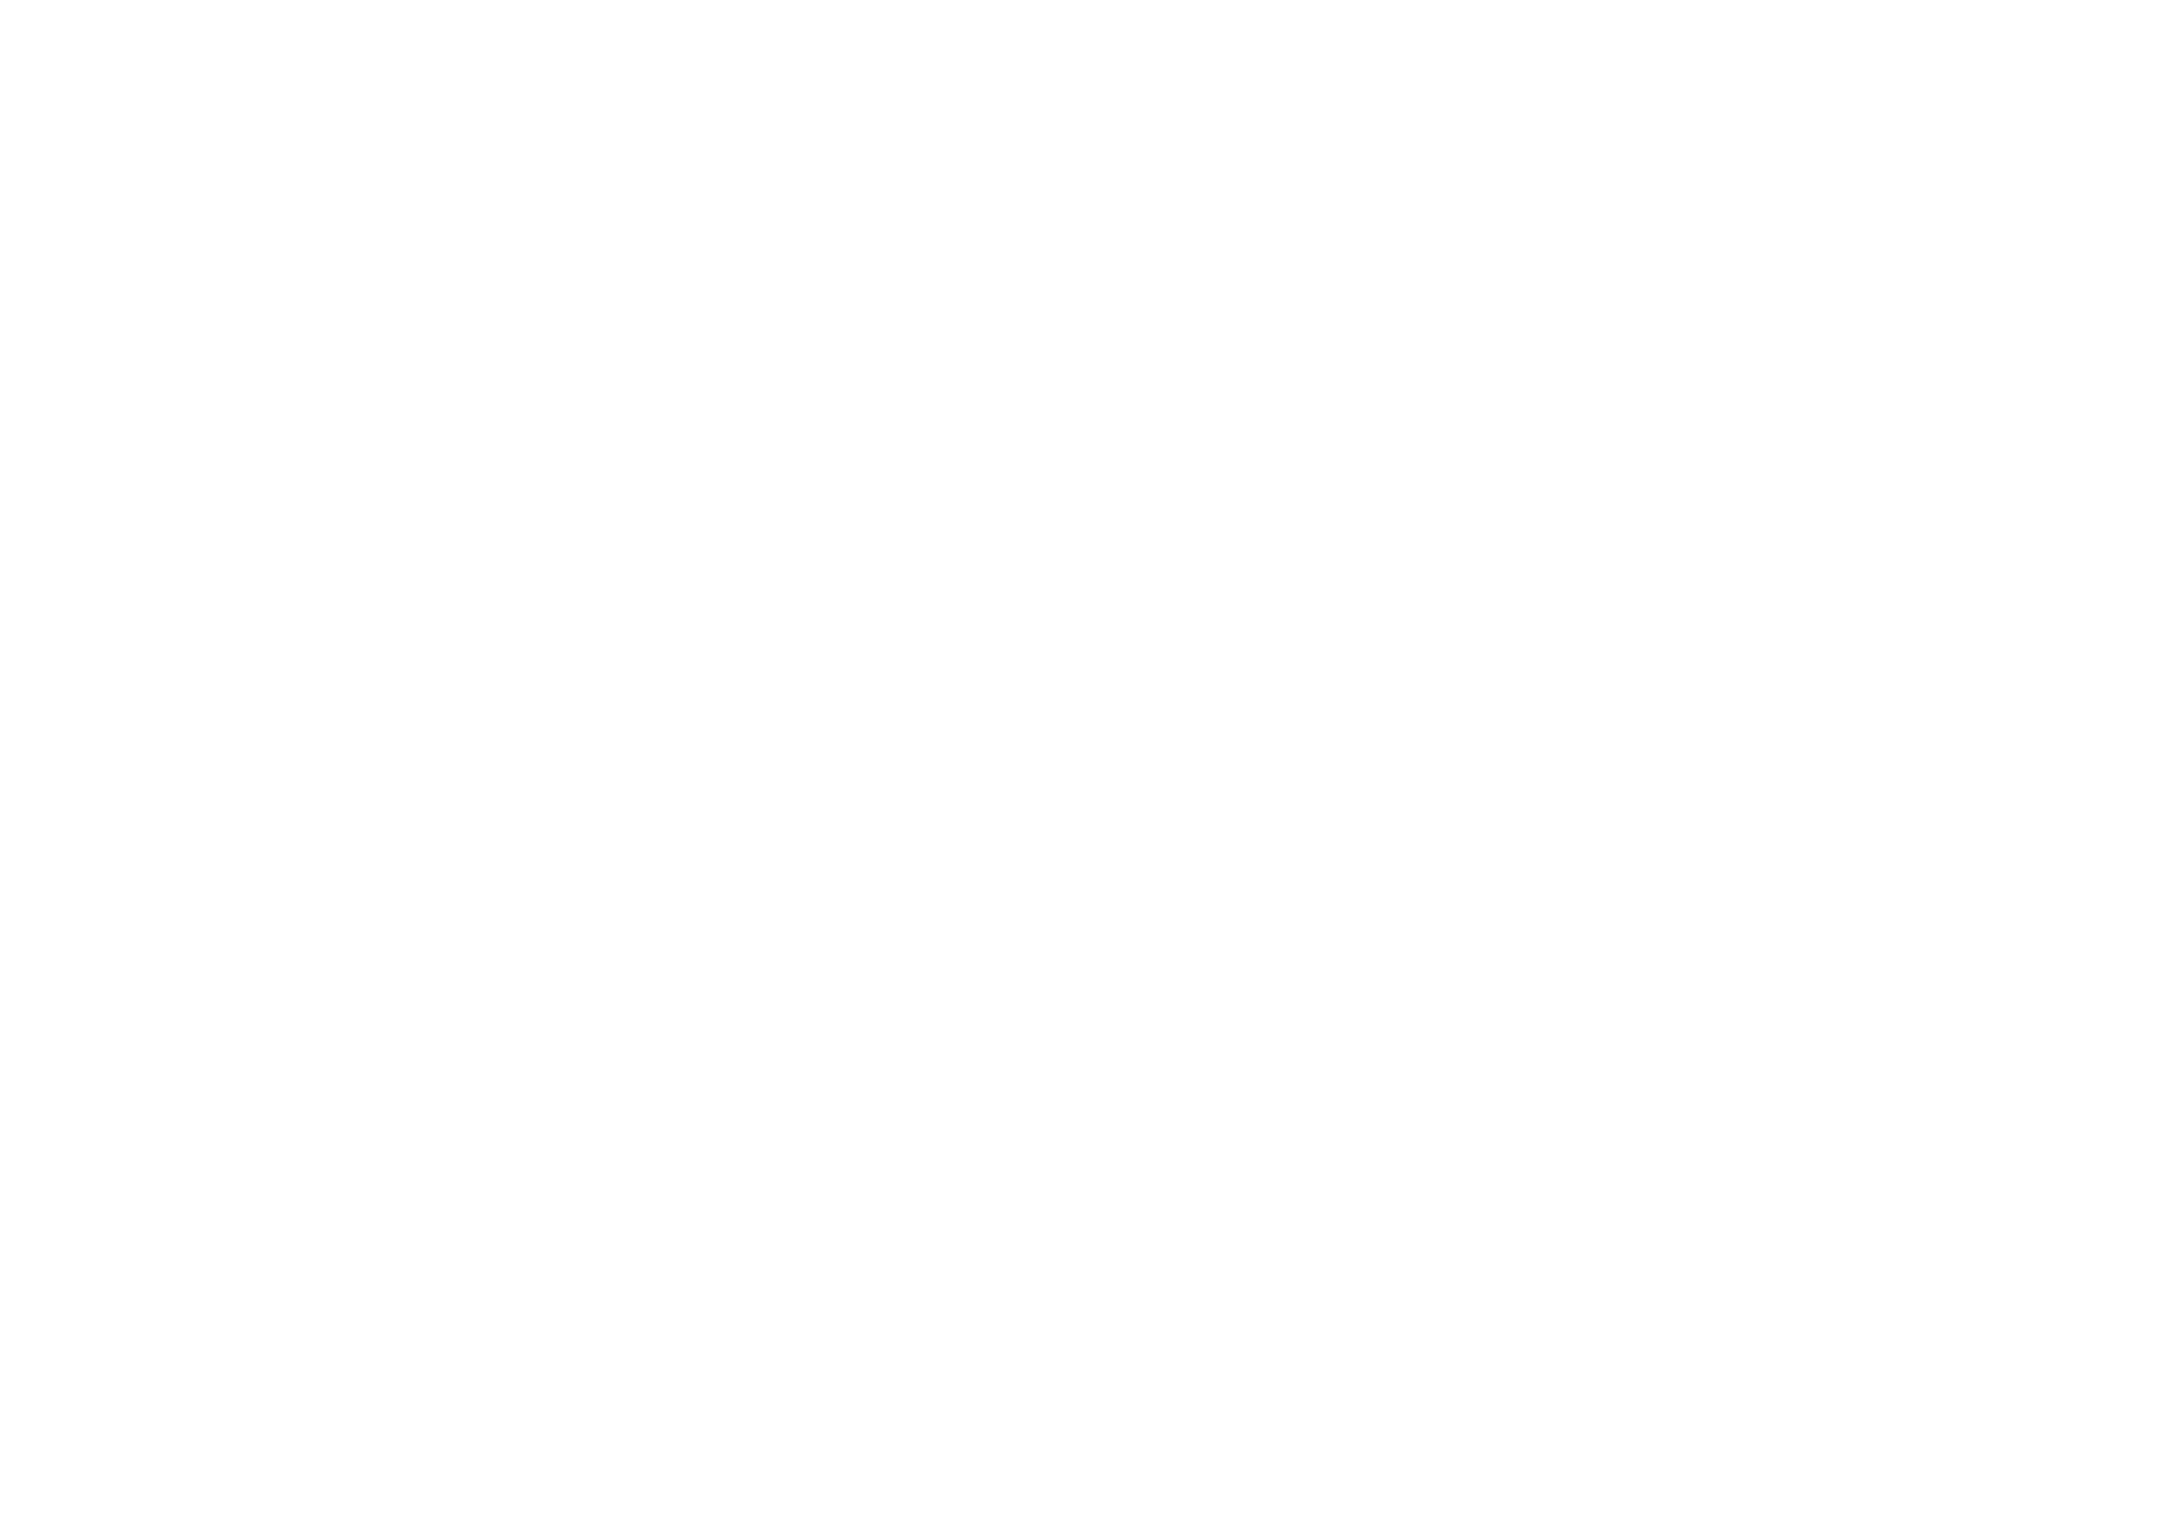 Project fit